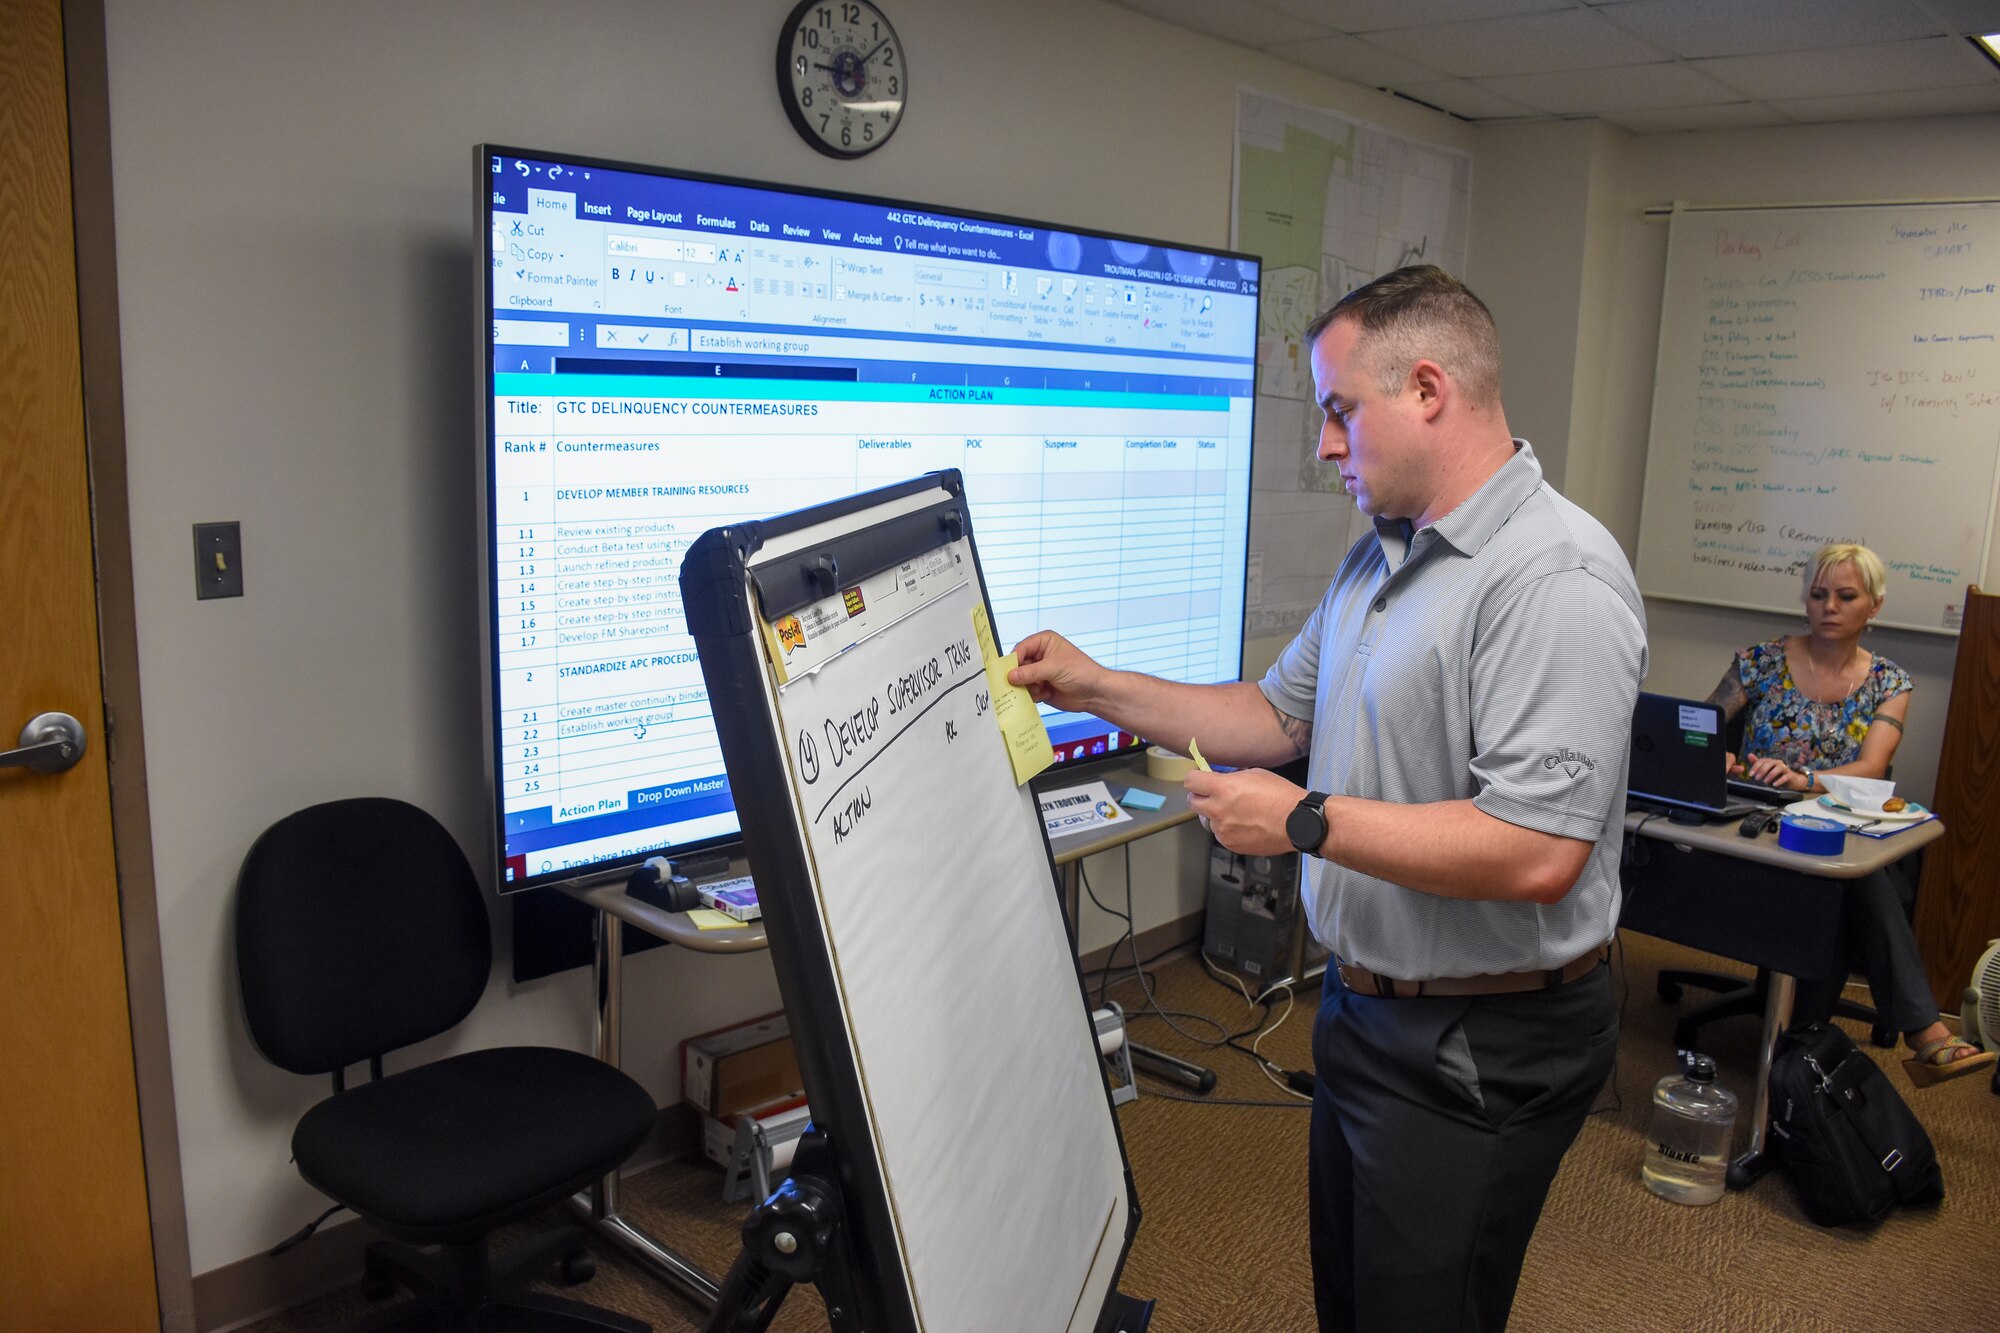 Tech. Sgt. Jeff Abel places a sticky note onto a giant note pad, recording an idea from one of the team members.